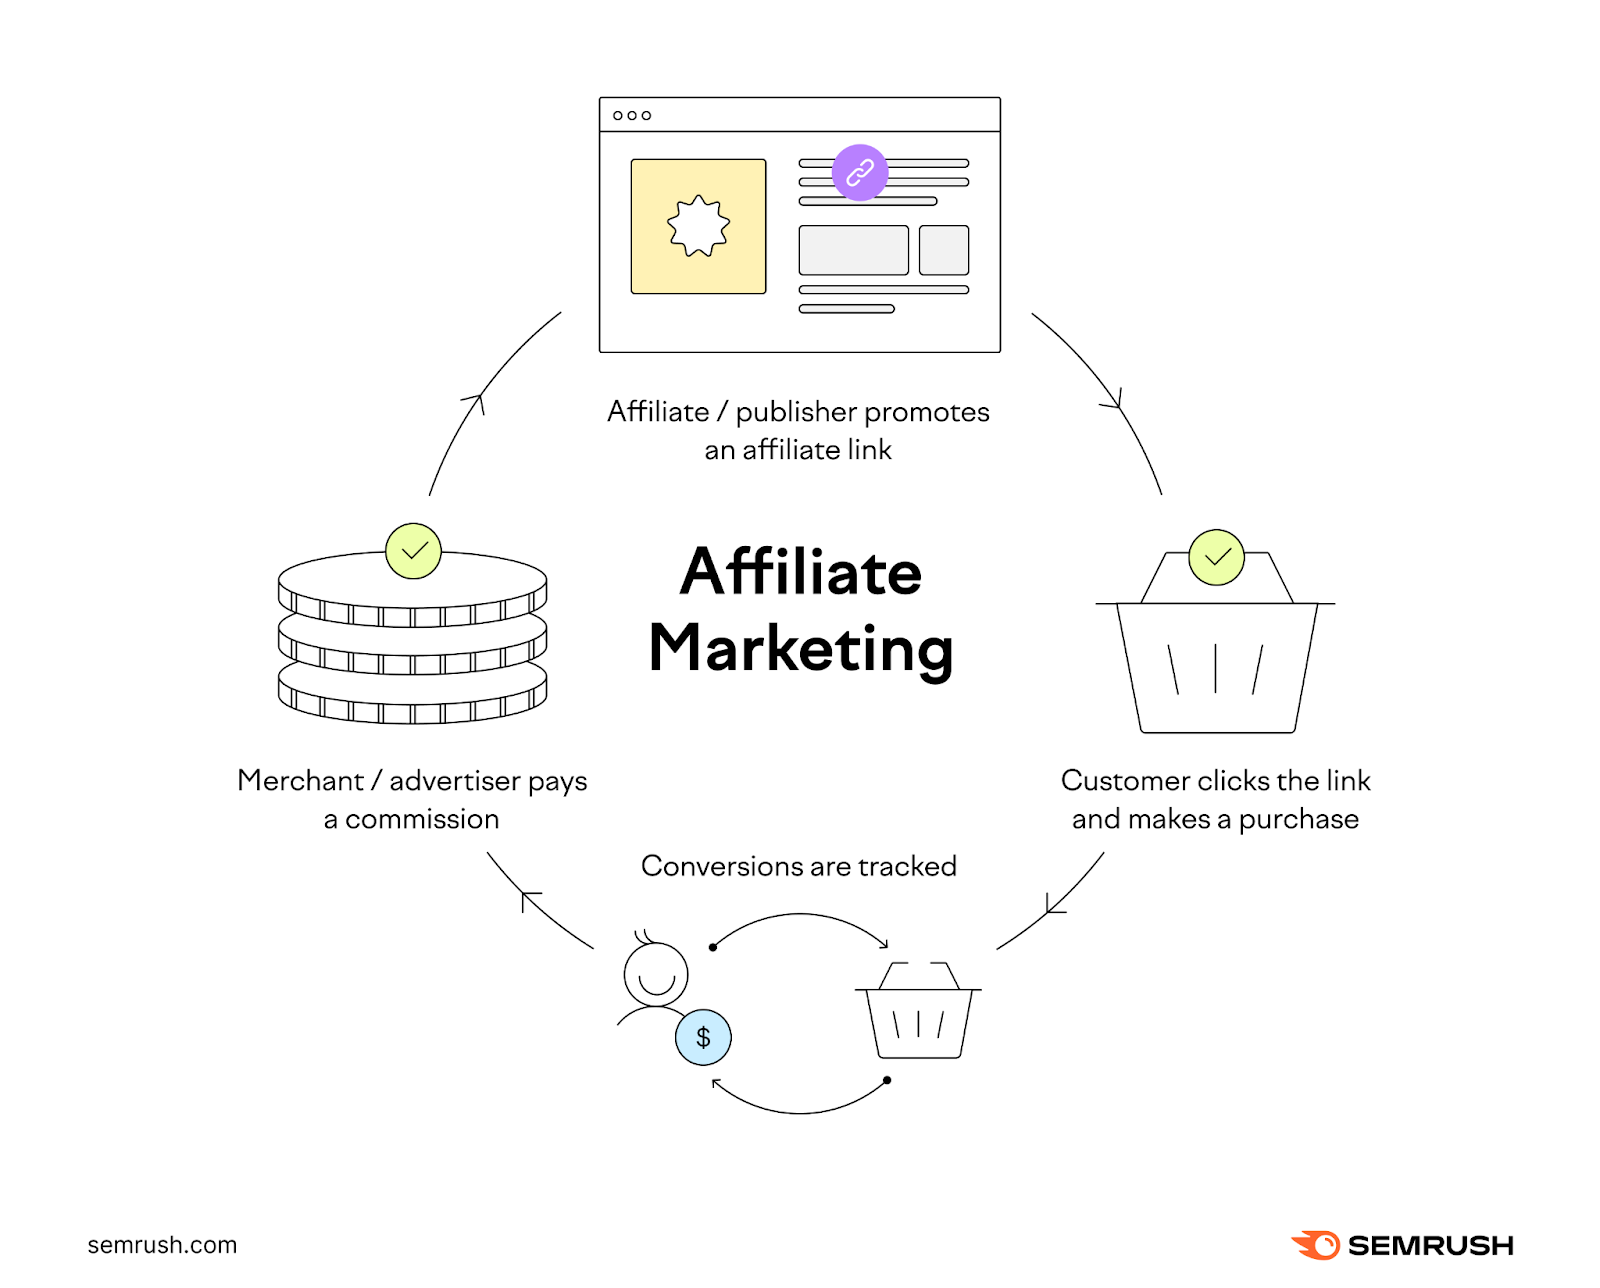 Affiliate or publisher promotes an affiliate link, customer clicks your link and makes a purchase, conversions are tracked, then the merchant or advertiser pays a commission